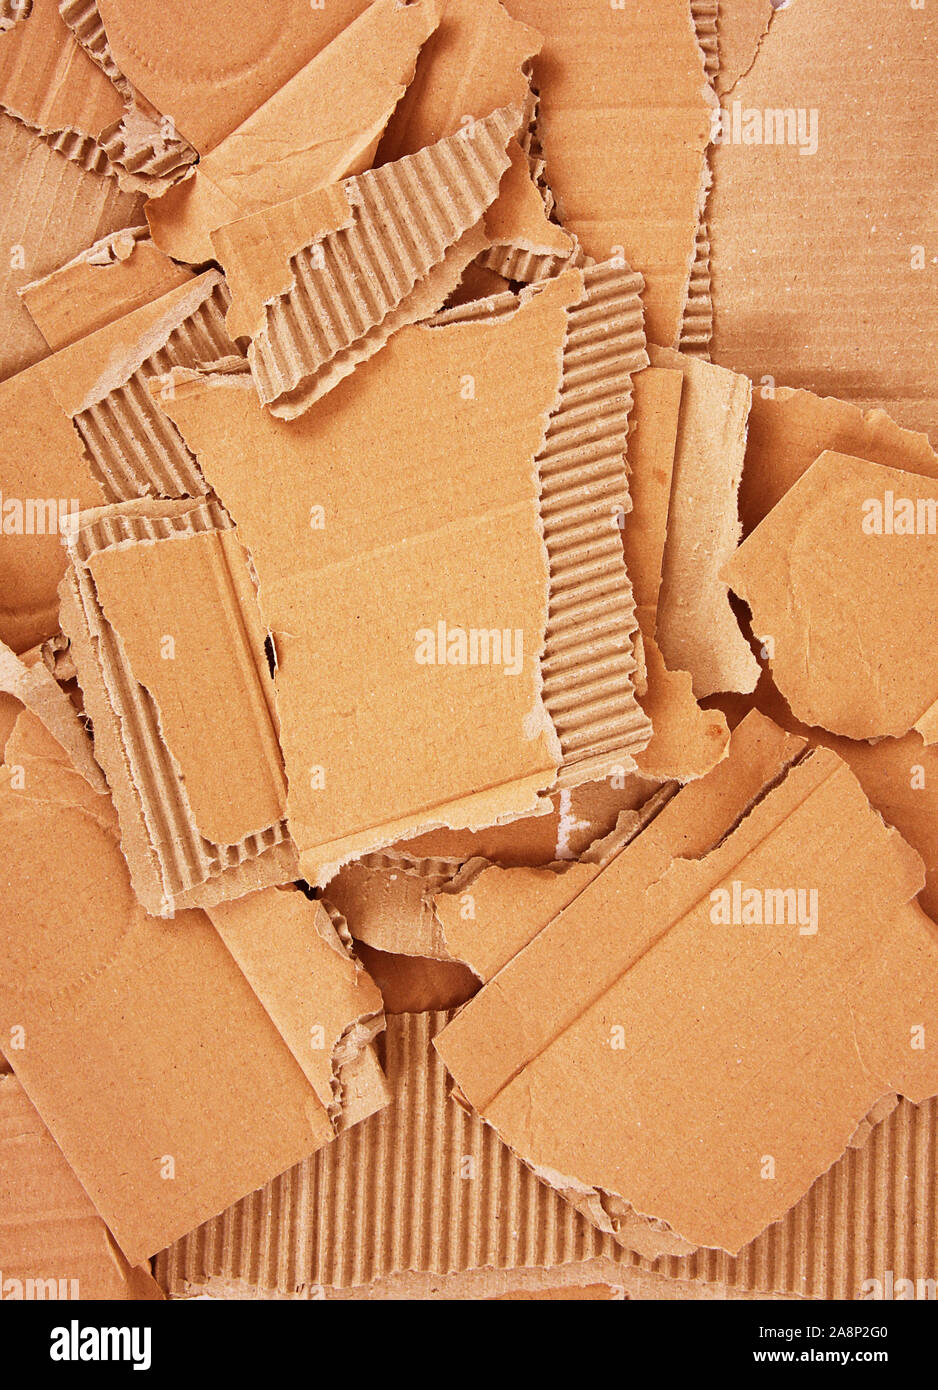 a cardboard for recycle background Stock Photo